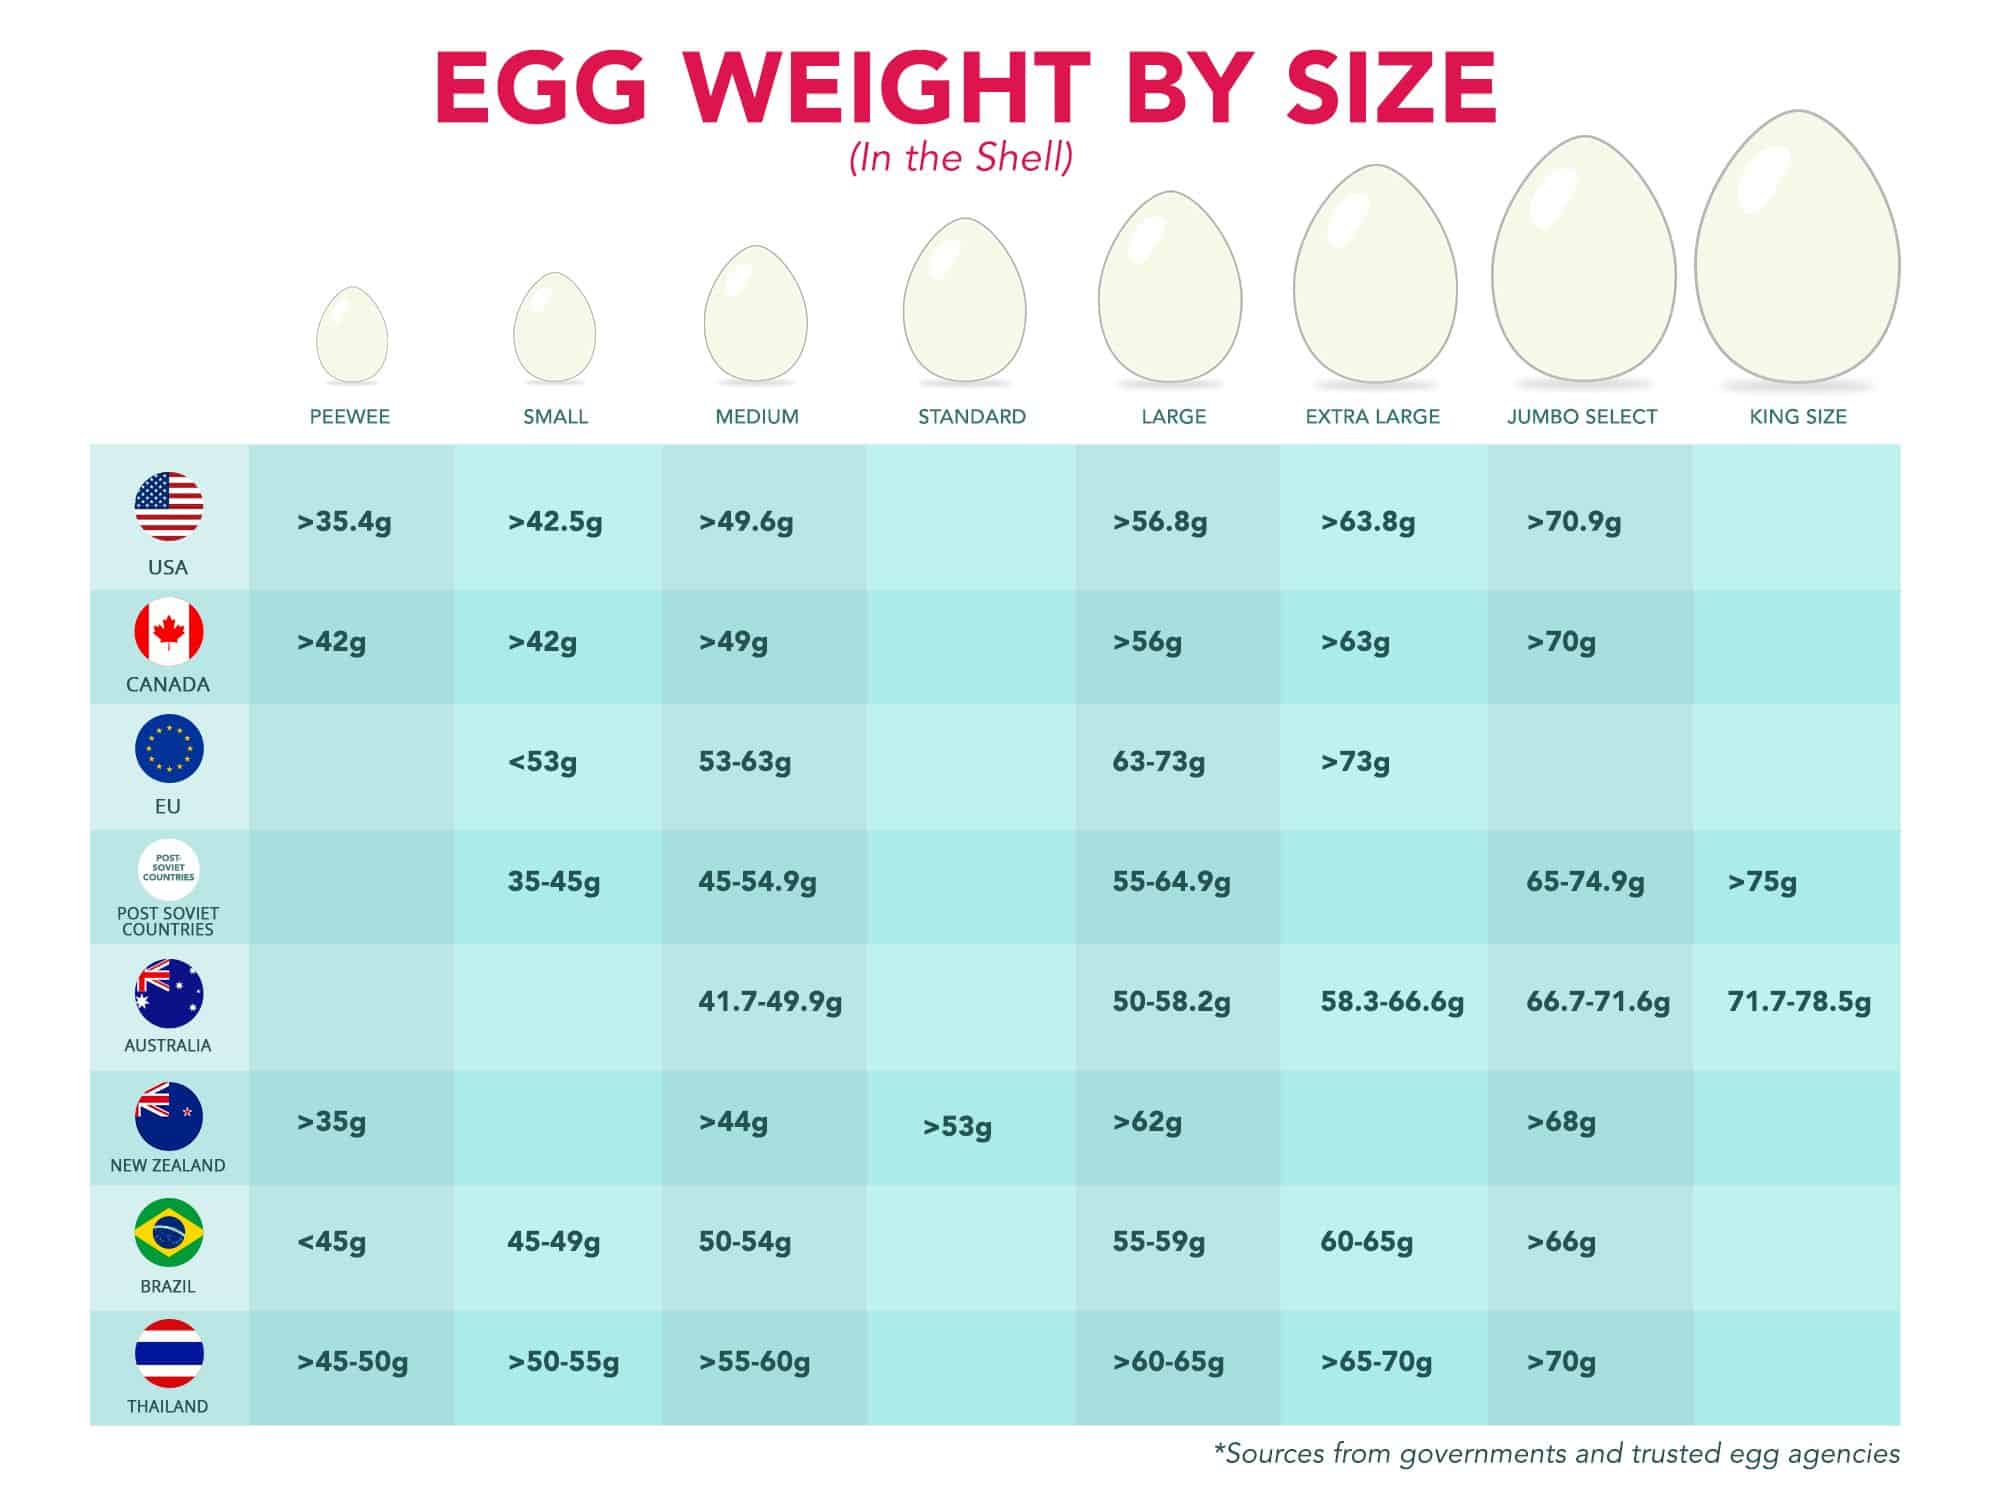 Egg Weight By Size Chart featuring various sizes, weights, and locations of eggs.